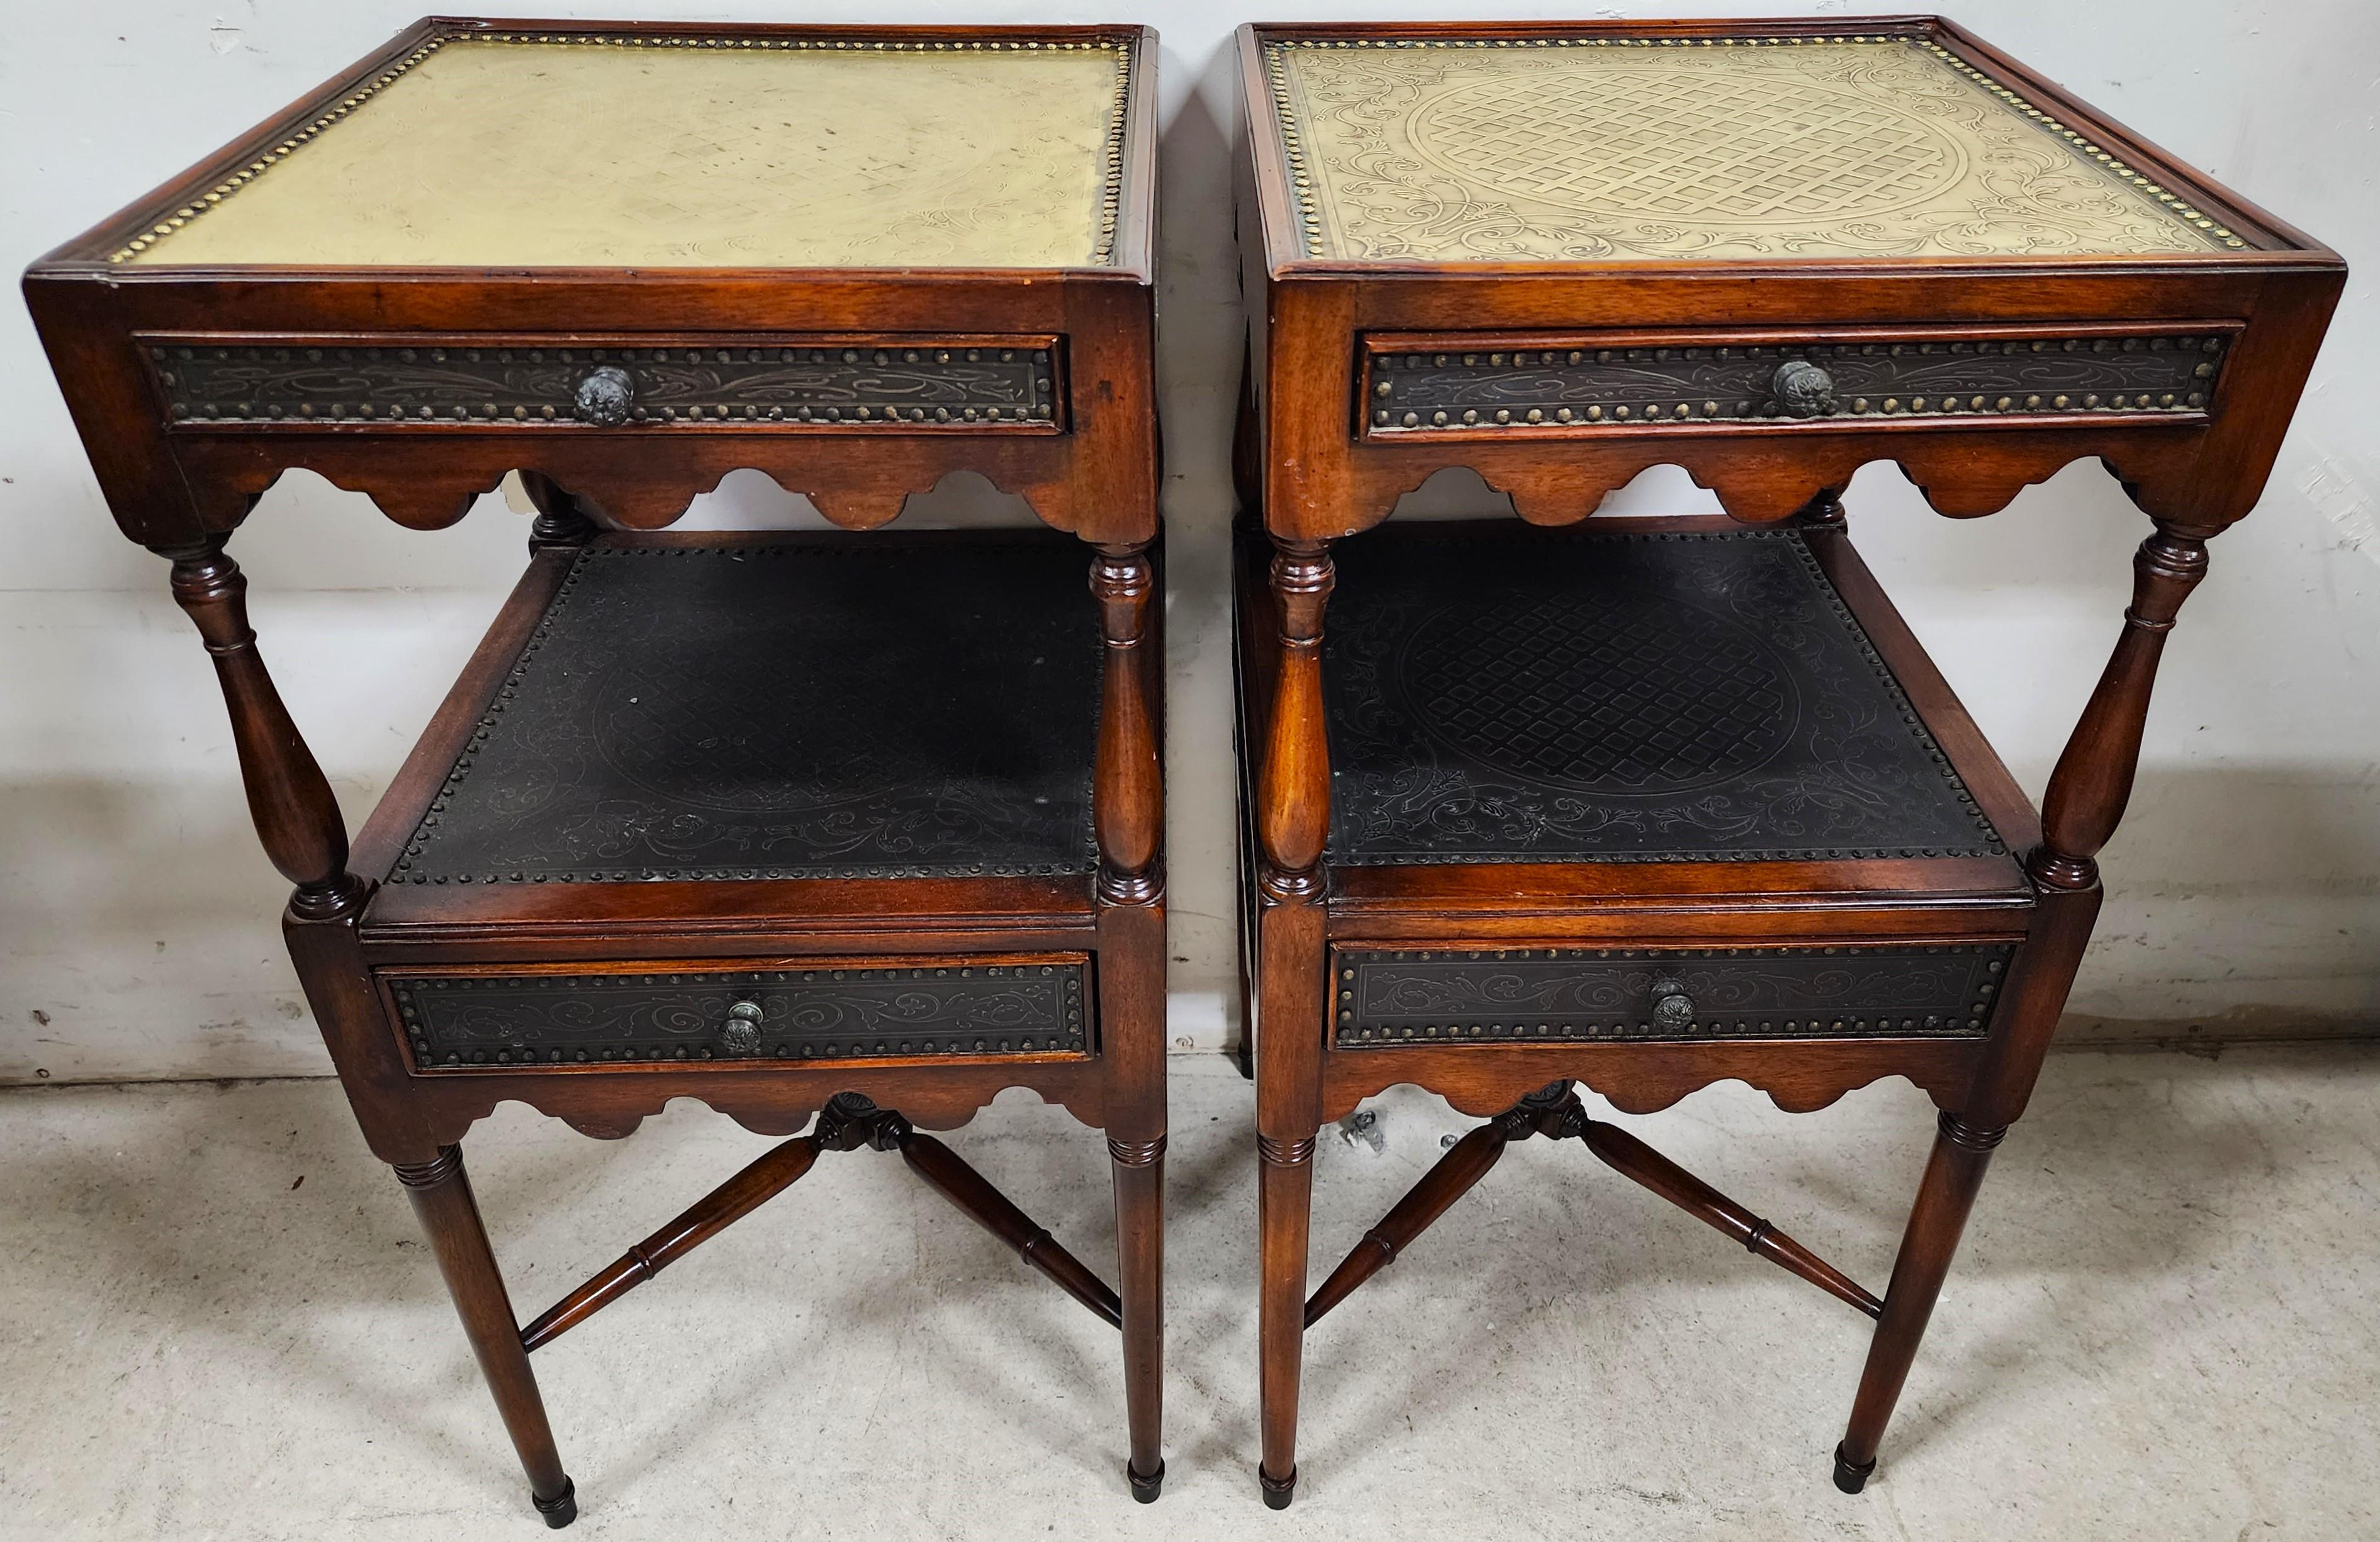 For FULL item description click on CONTINUE READING at the bottom of this page.

Offering One Of Our Recent Palm Beach Estate Fine Furniture Acquisitions Of A
Pair of THEODORE ALEXANDER Side Tables Nightstands from their Armoury Collection
Featuring